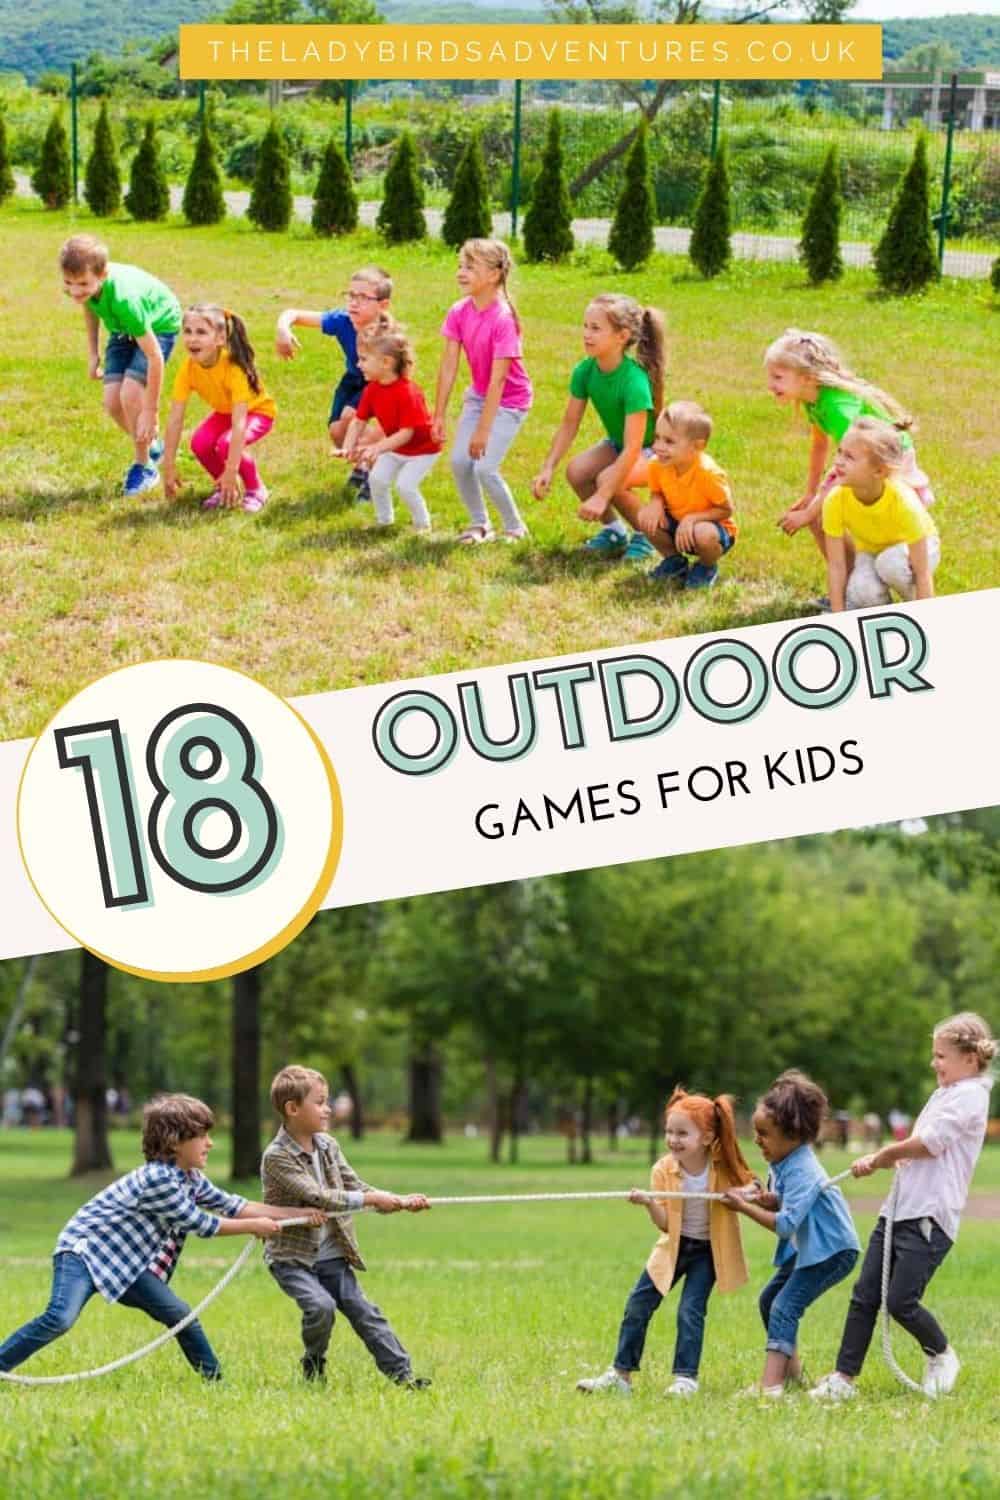 2 photos of kids playing outdoors and text that reads 19 outdoor games for kids